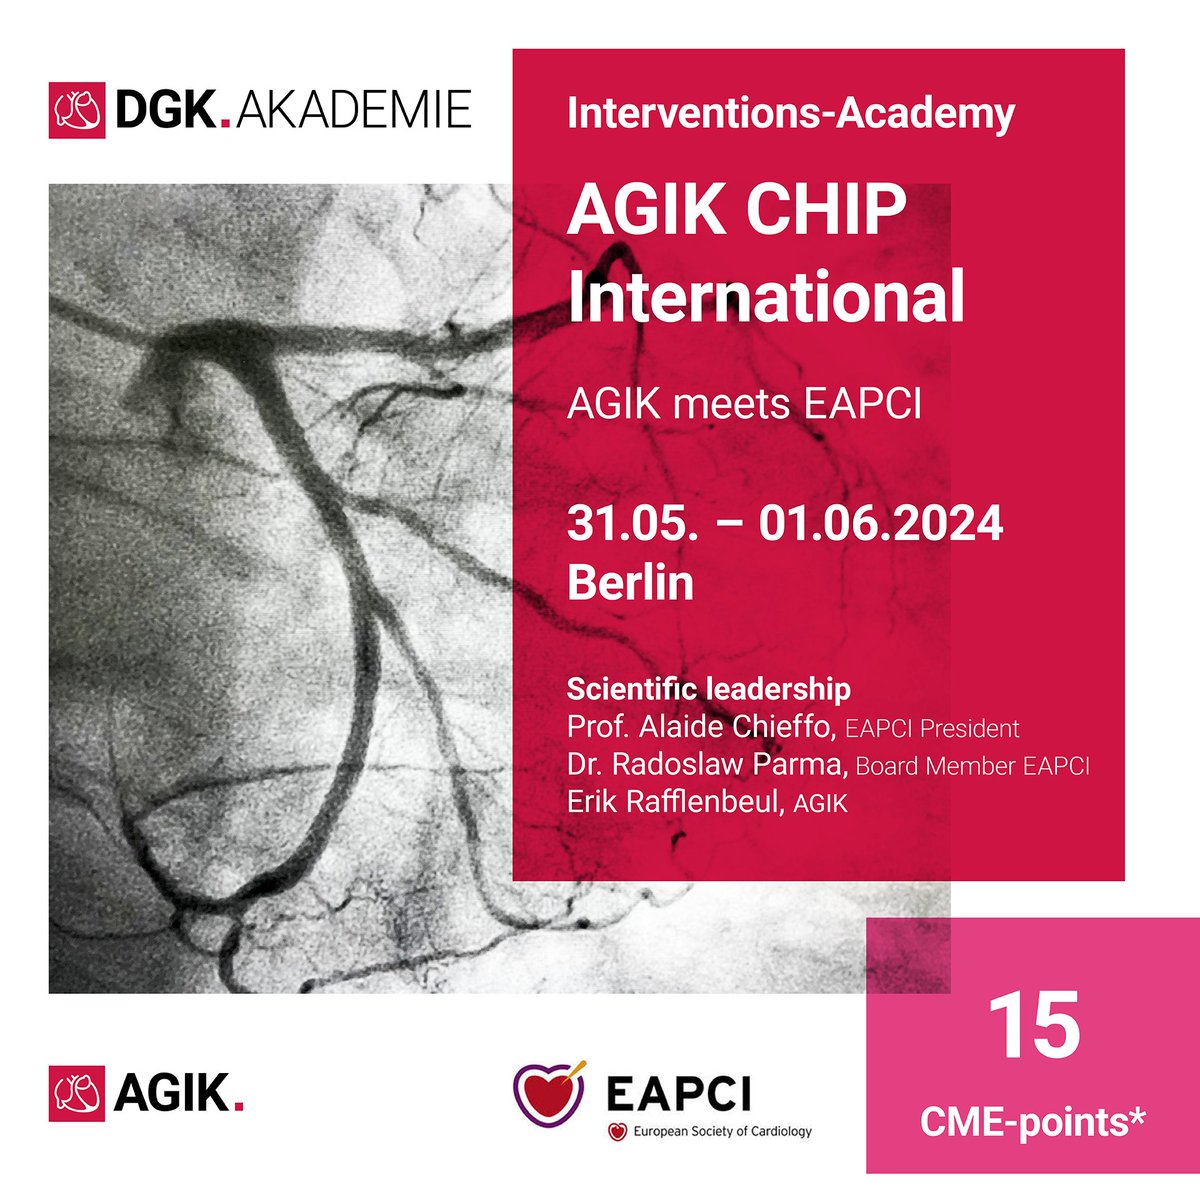 #EAPCI fosters the global collaboration with NWGs + inter-/national societies to improve #EducationFirst!

Become part of this new initiative:
#AGIK CHIP International Course
with #CaseBasedLearning + #SimulationBasedLearning (@Mentice G7+)

🚨Register:
🔗bit.ly/AGIKCHIP